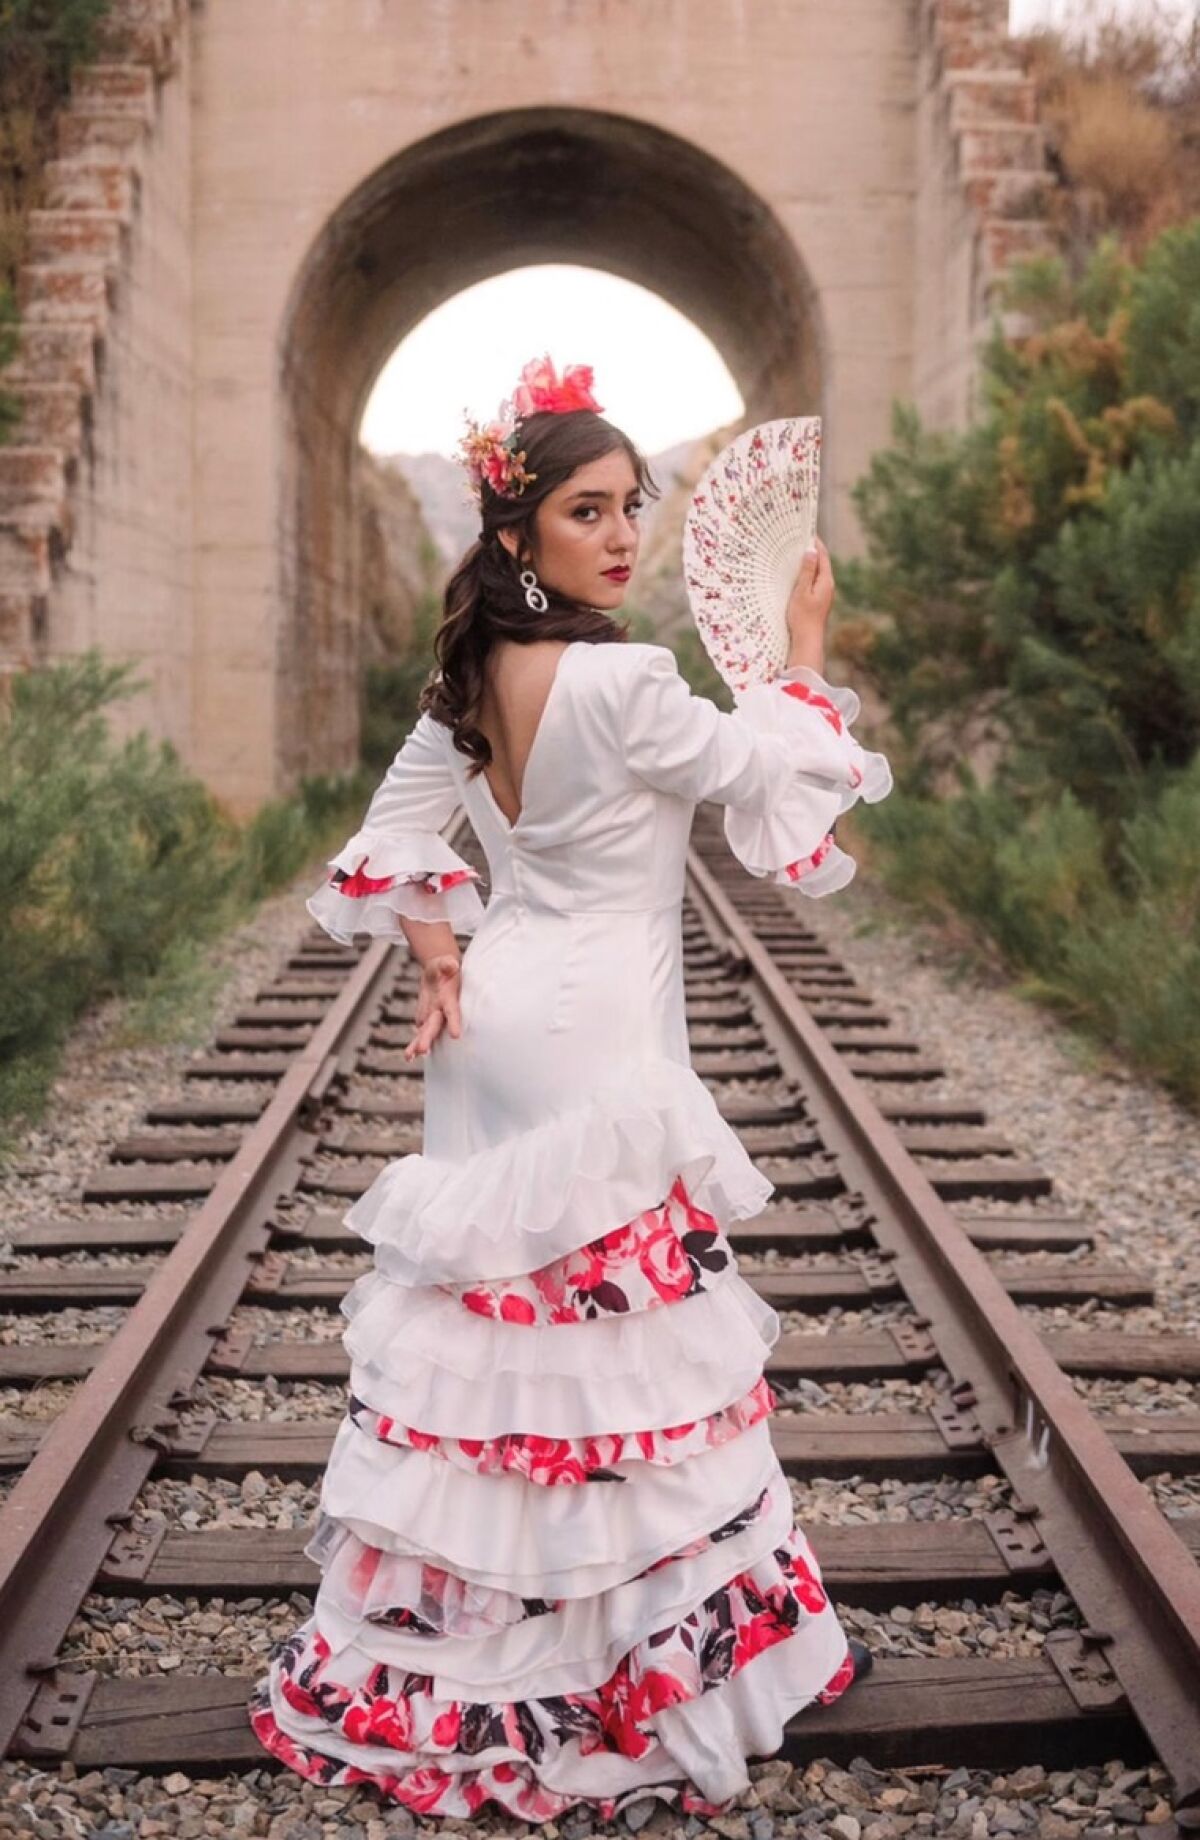 Flamenco dancer Isabella Valenzuela will perform at the 10th-anniversary concert for Bodhi Tree.